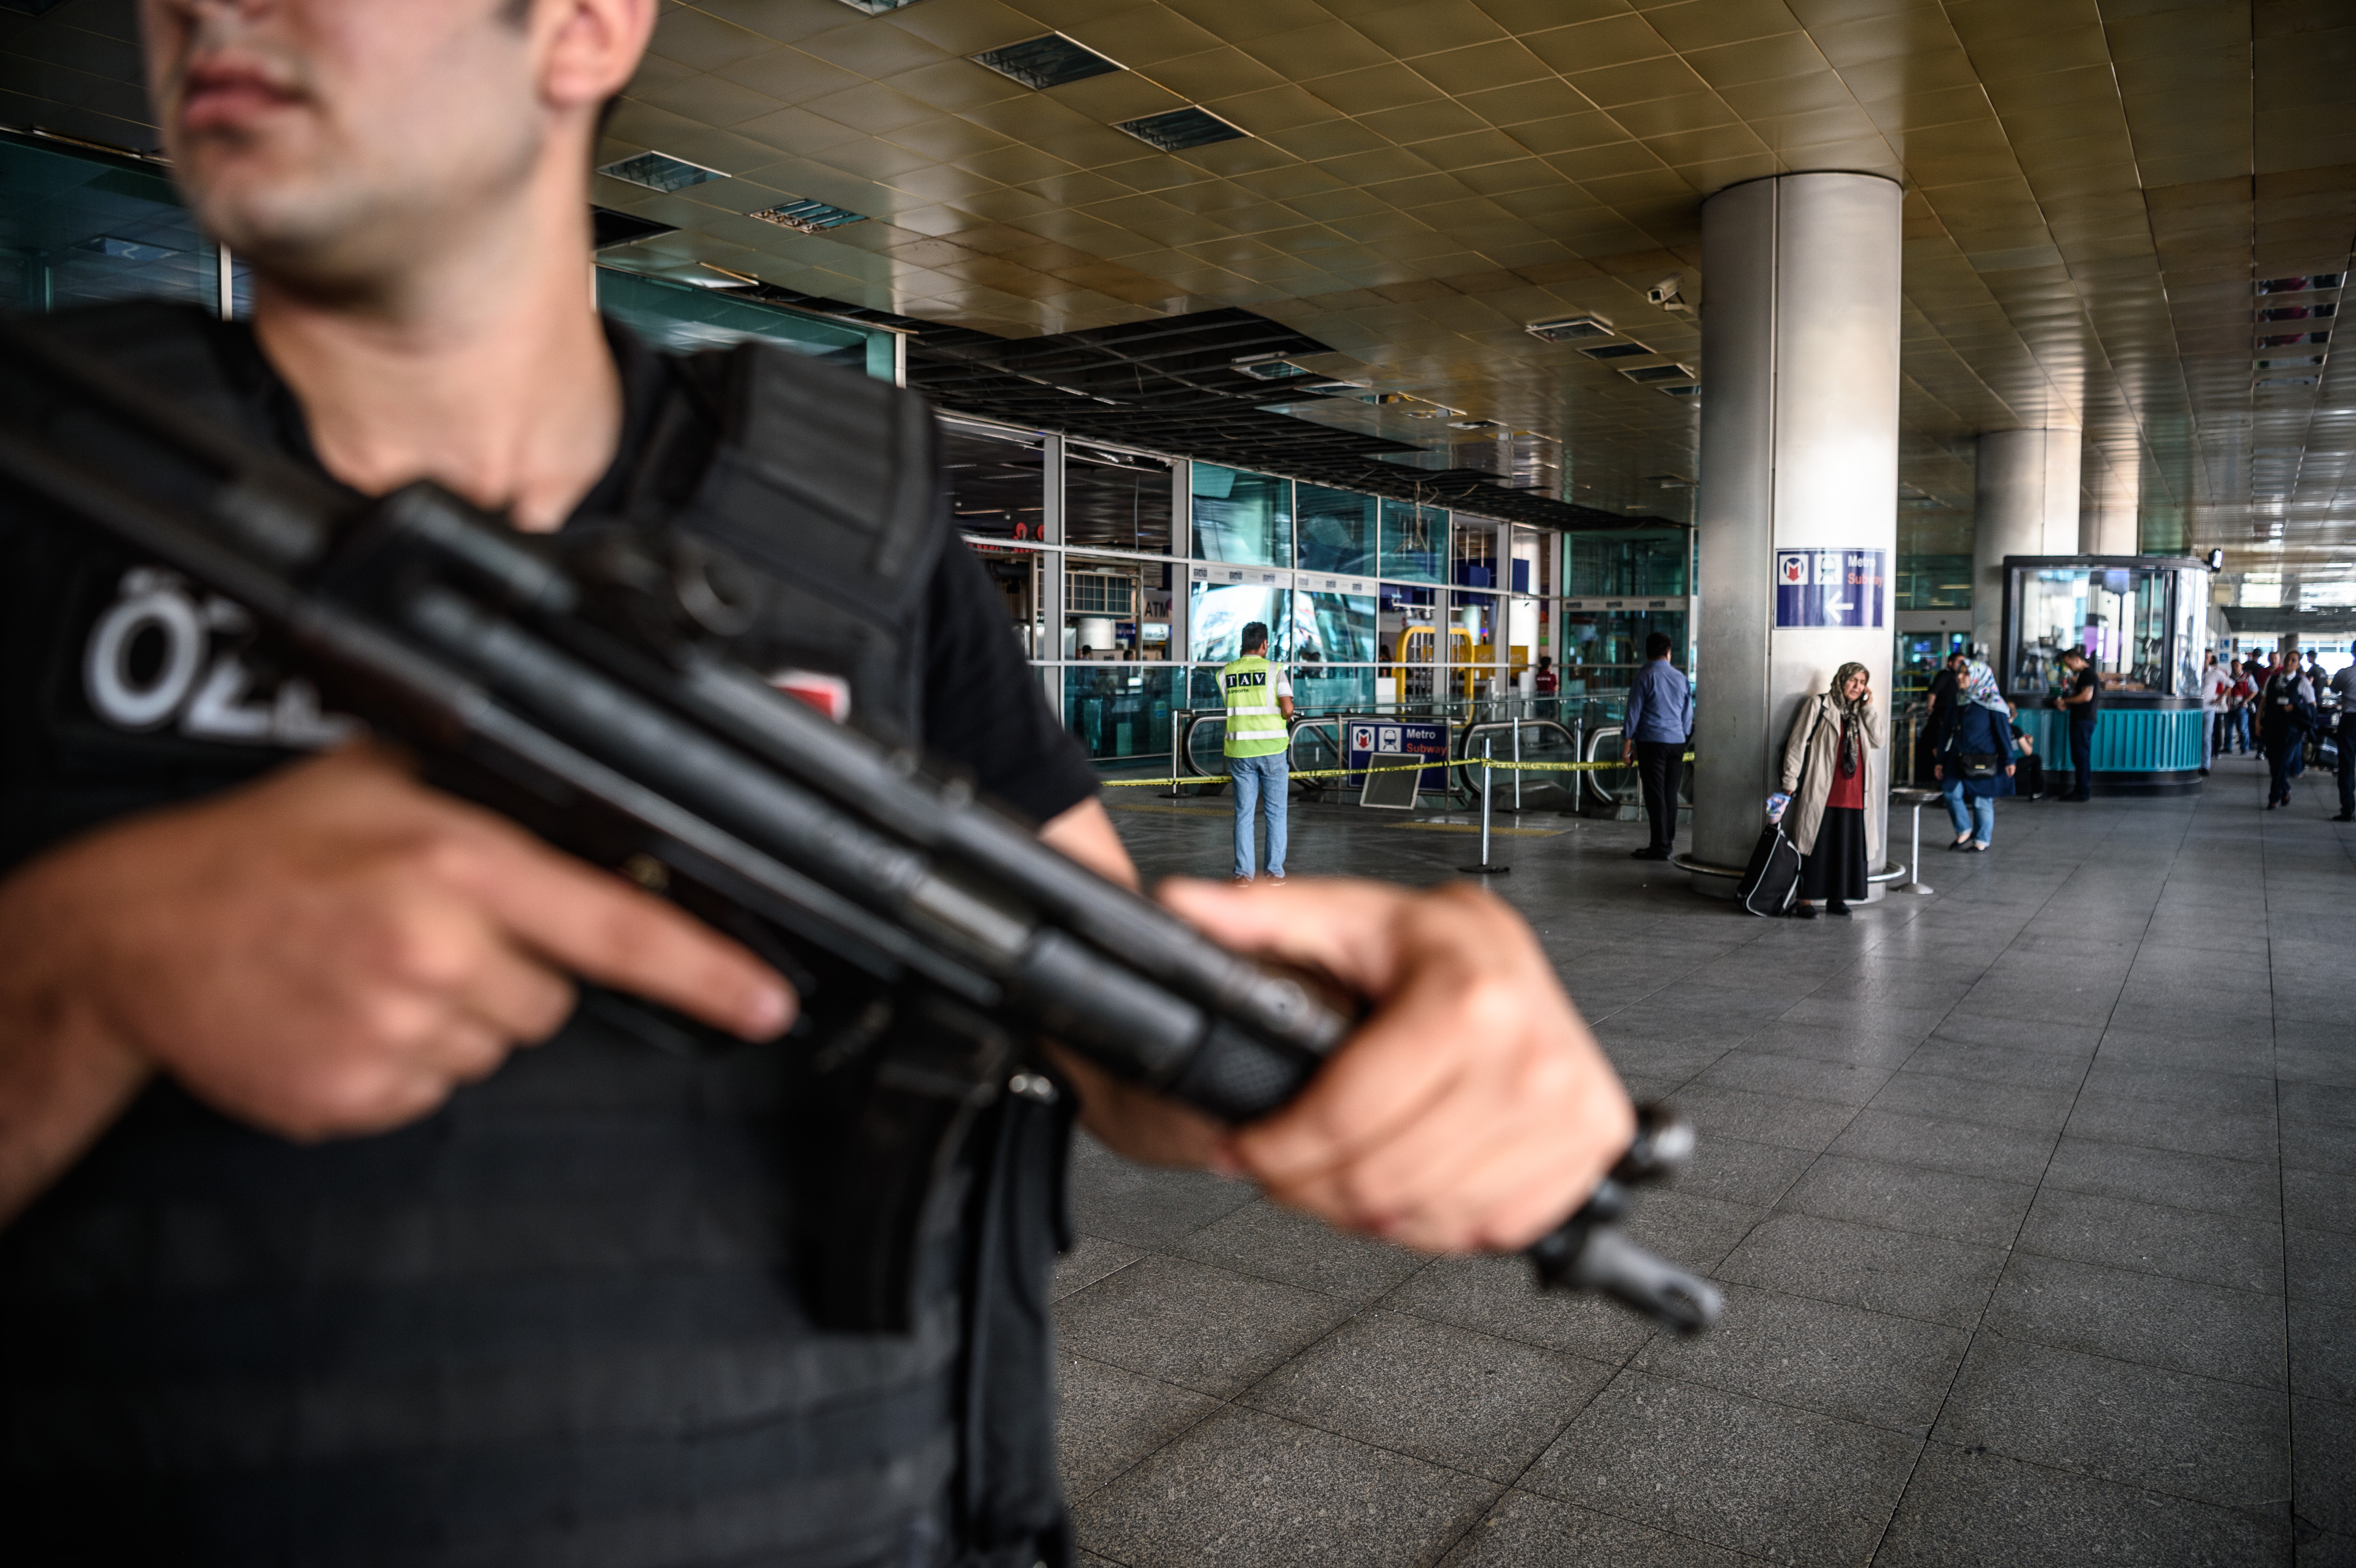 EDITORS NOTE: Graphic content / A Turkish anti-riot police officer (L) stands guard as people walk past near the explosion site on June 29, 2016 at Ataturk airport International arrival terminal in Istanbul, a day after a suicide bombing and gun attack targeted Istanbul's airport, killing at least 36 people. A triple suicide bombing and gun attack that occurred on June 28, 2016 at Istanbul's Ataturk airport has killed at least 36 people, including foreigners, with Turkey's prime minister saying early signs pointed to an assault by the Islamic State group. / AFP PHOTO / OZAN KOSE / Turkey OUT